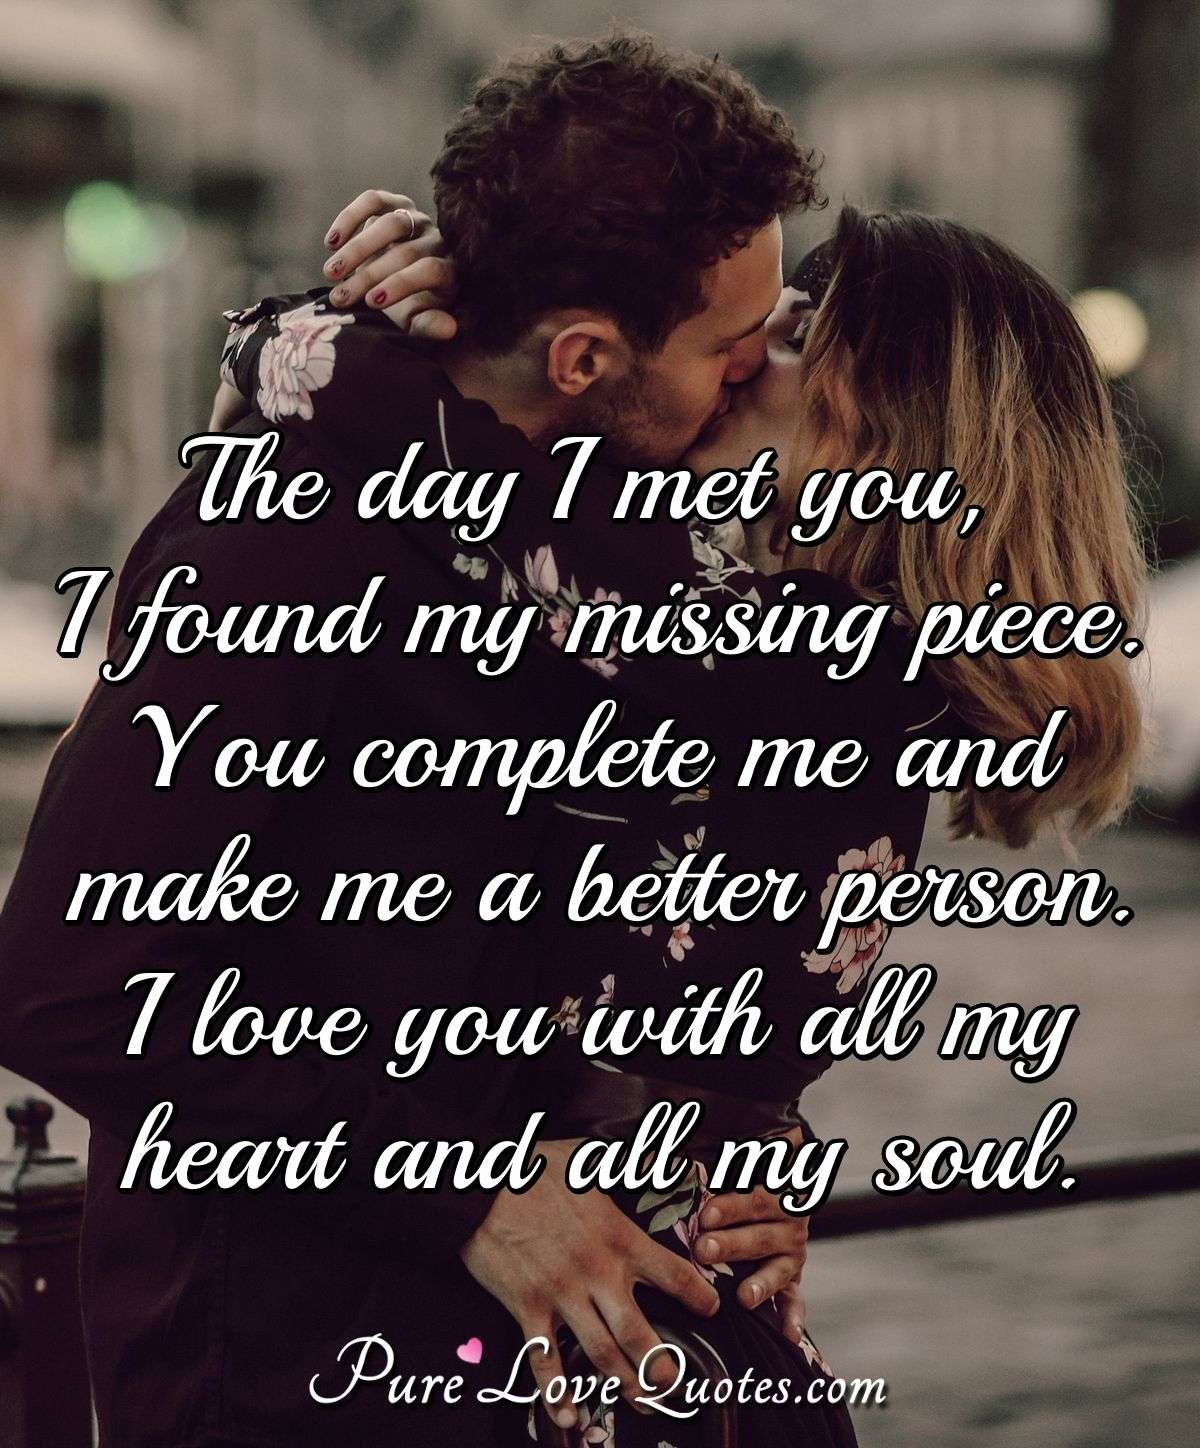 The day I met you, I found my missing piece. You complete me and make me a better person. I love you with all my heart and all my soul. - Anonymous